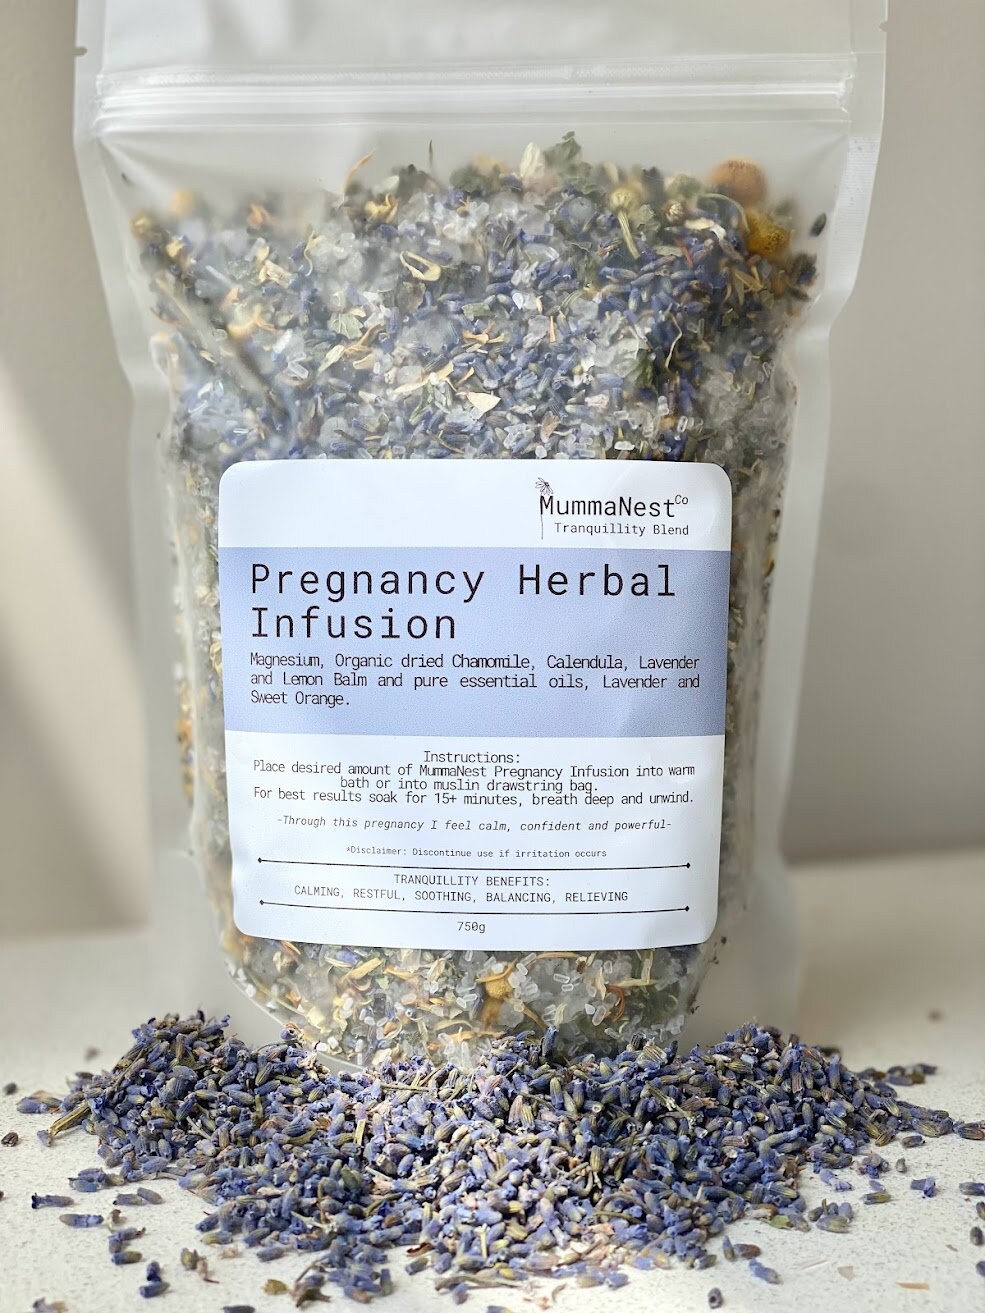 Herbal Bath Tea, European Spa Salts and Therapeutic Essential Oils for  Relaxation & Stress Relief, Botanical Blend Aromatherapy, Spa Day 